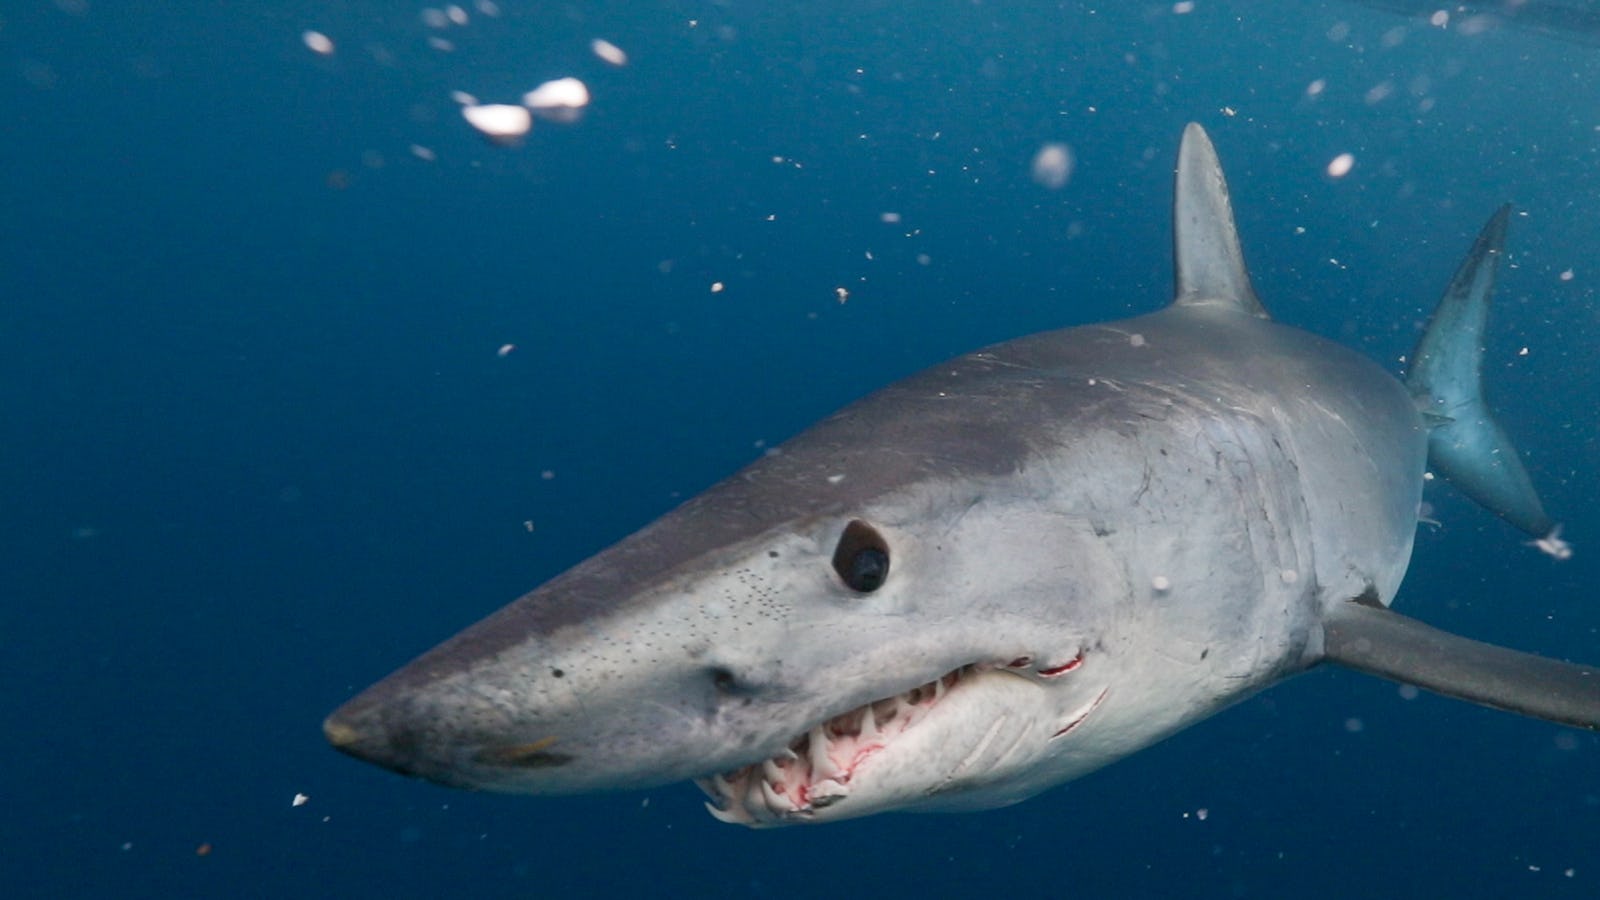 You Can Stream Shark Week 2019 Online For Free, Which Is Pretty "Fintastic"